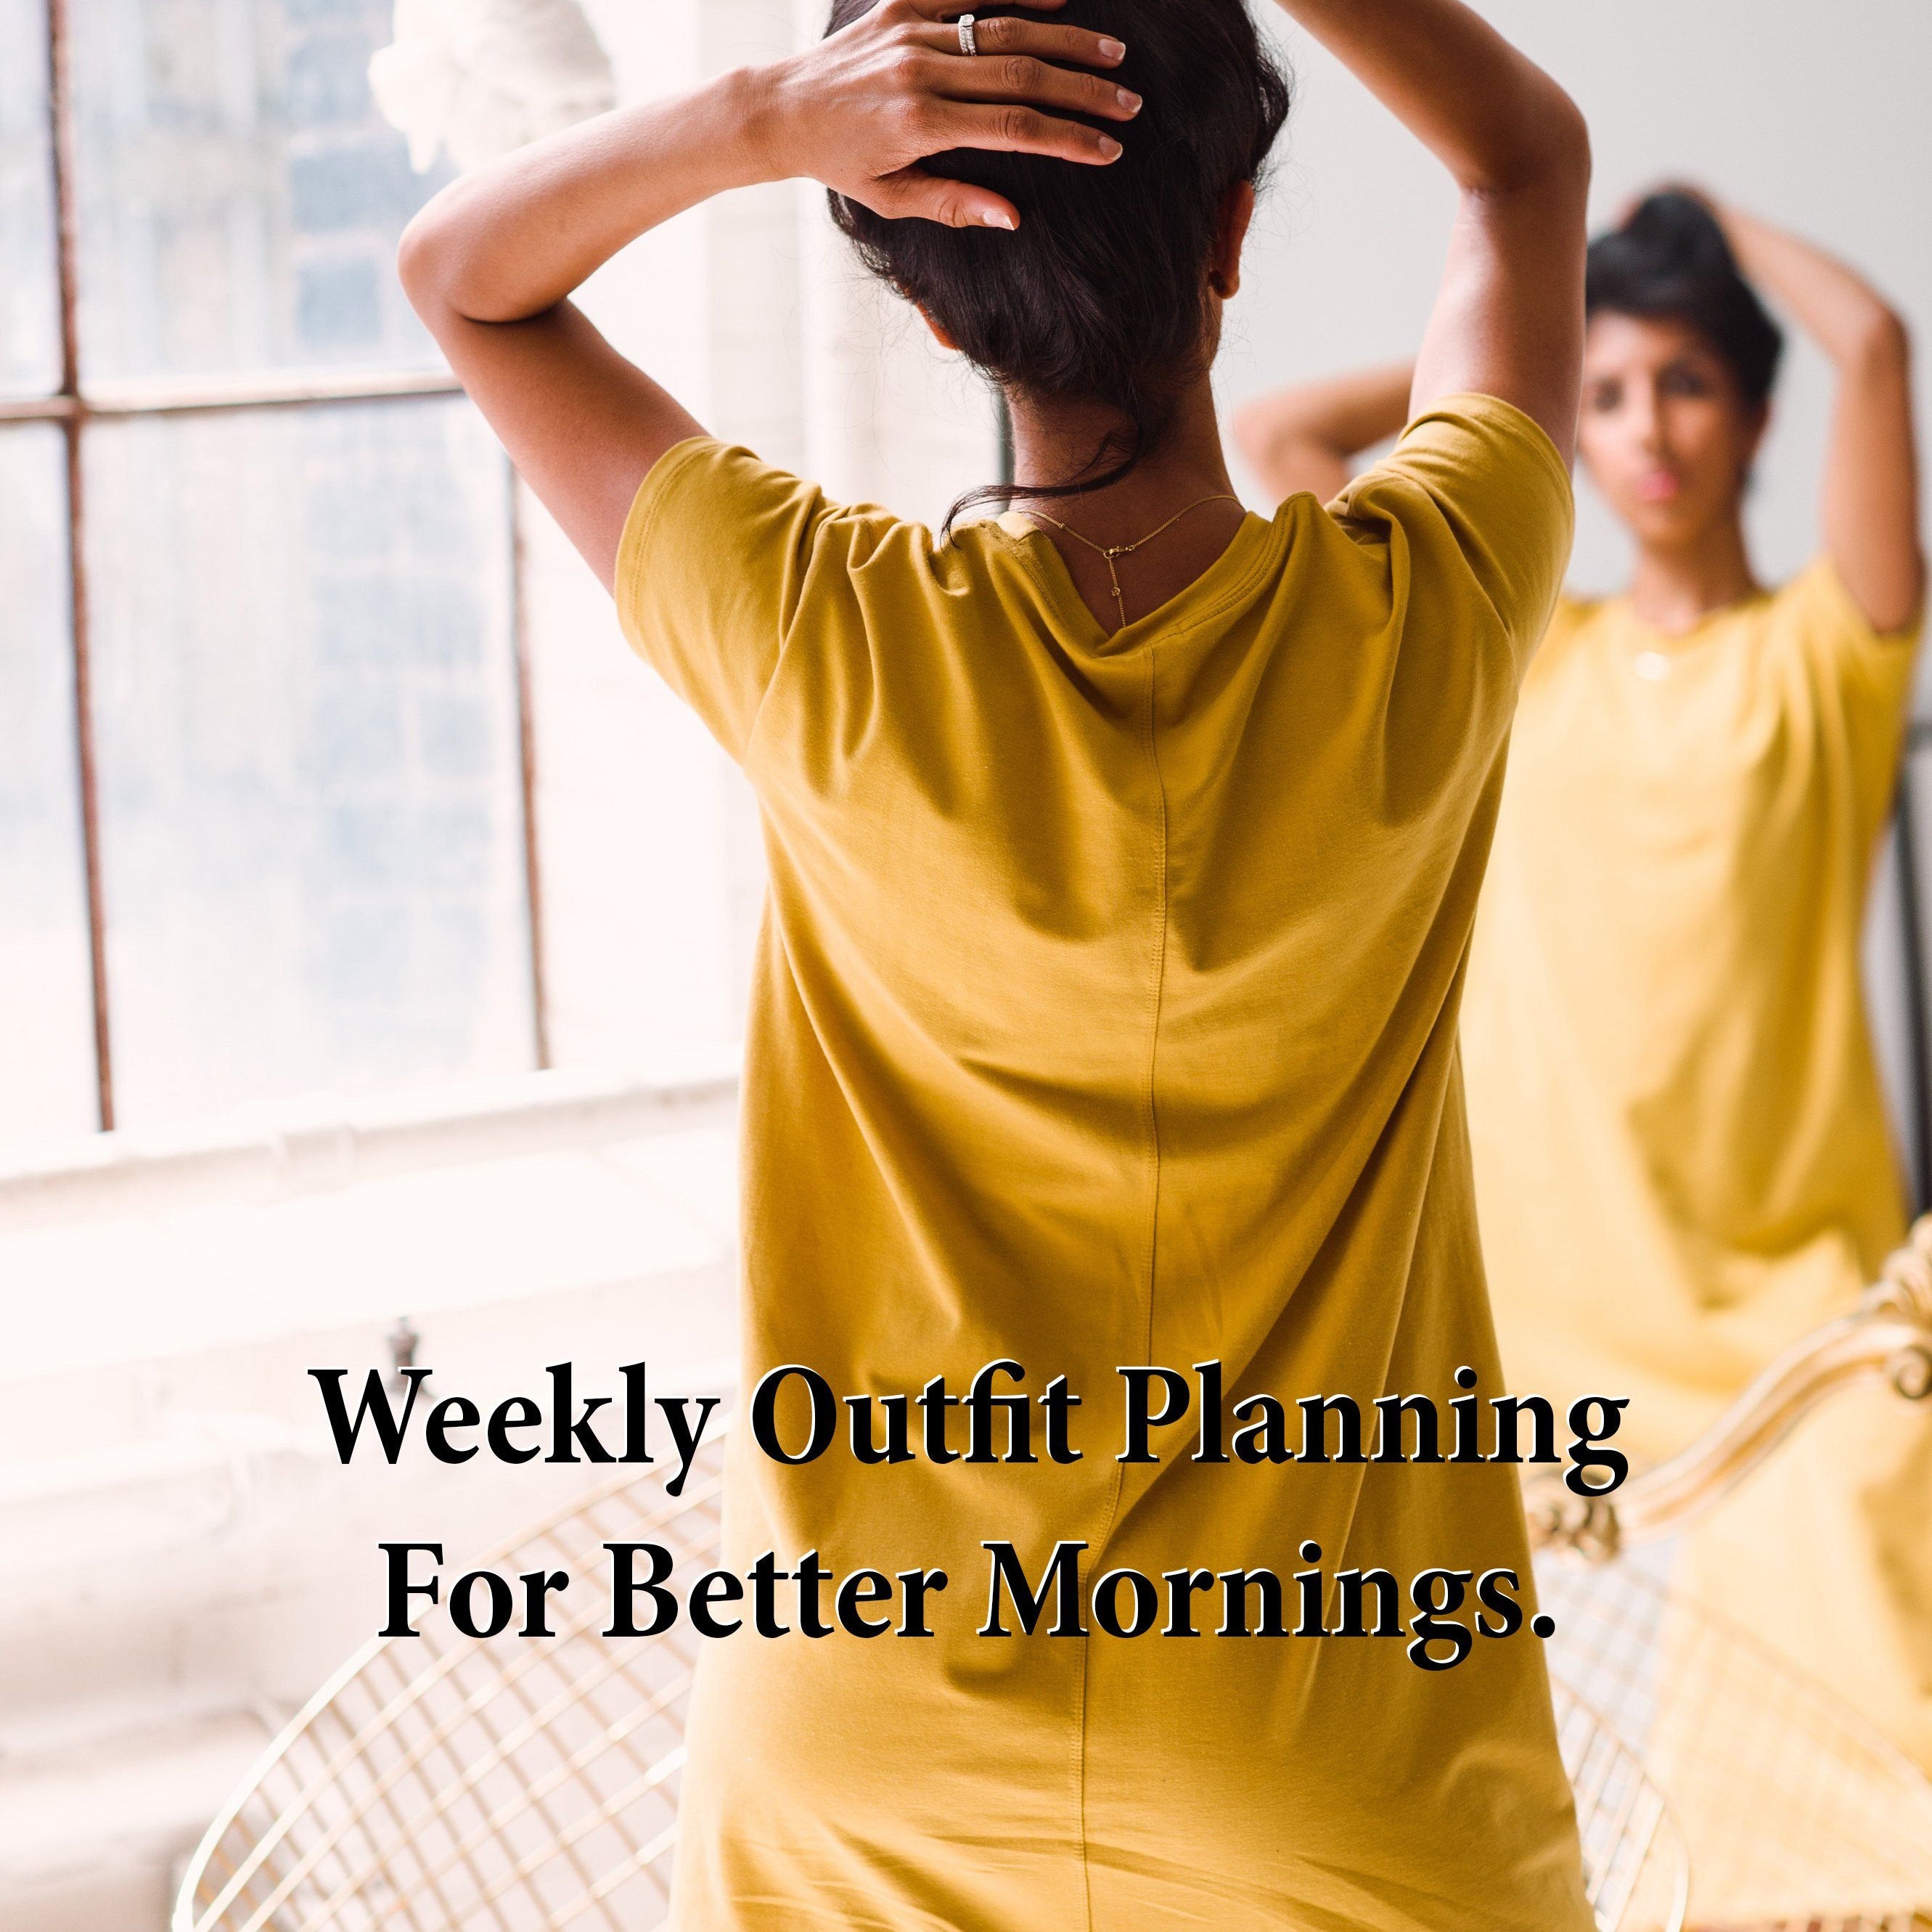 Outfit Planning For Better Weekday Mornings - FRANC